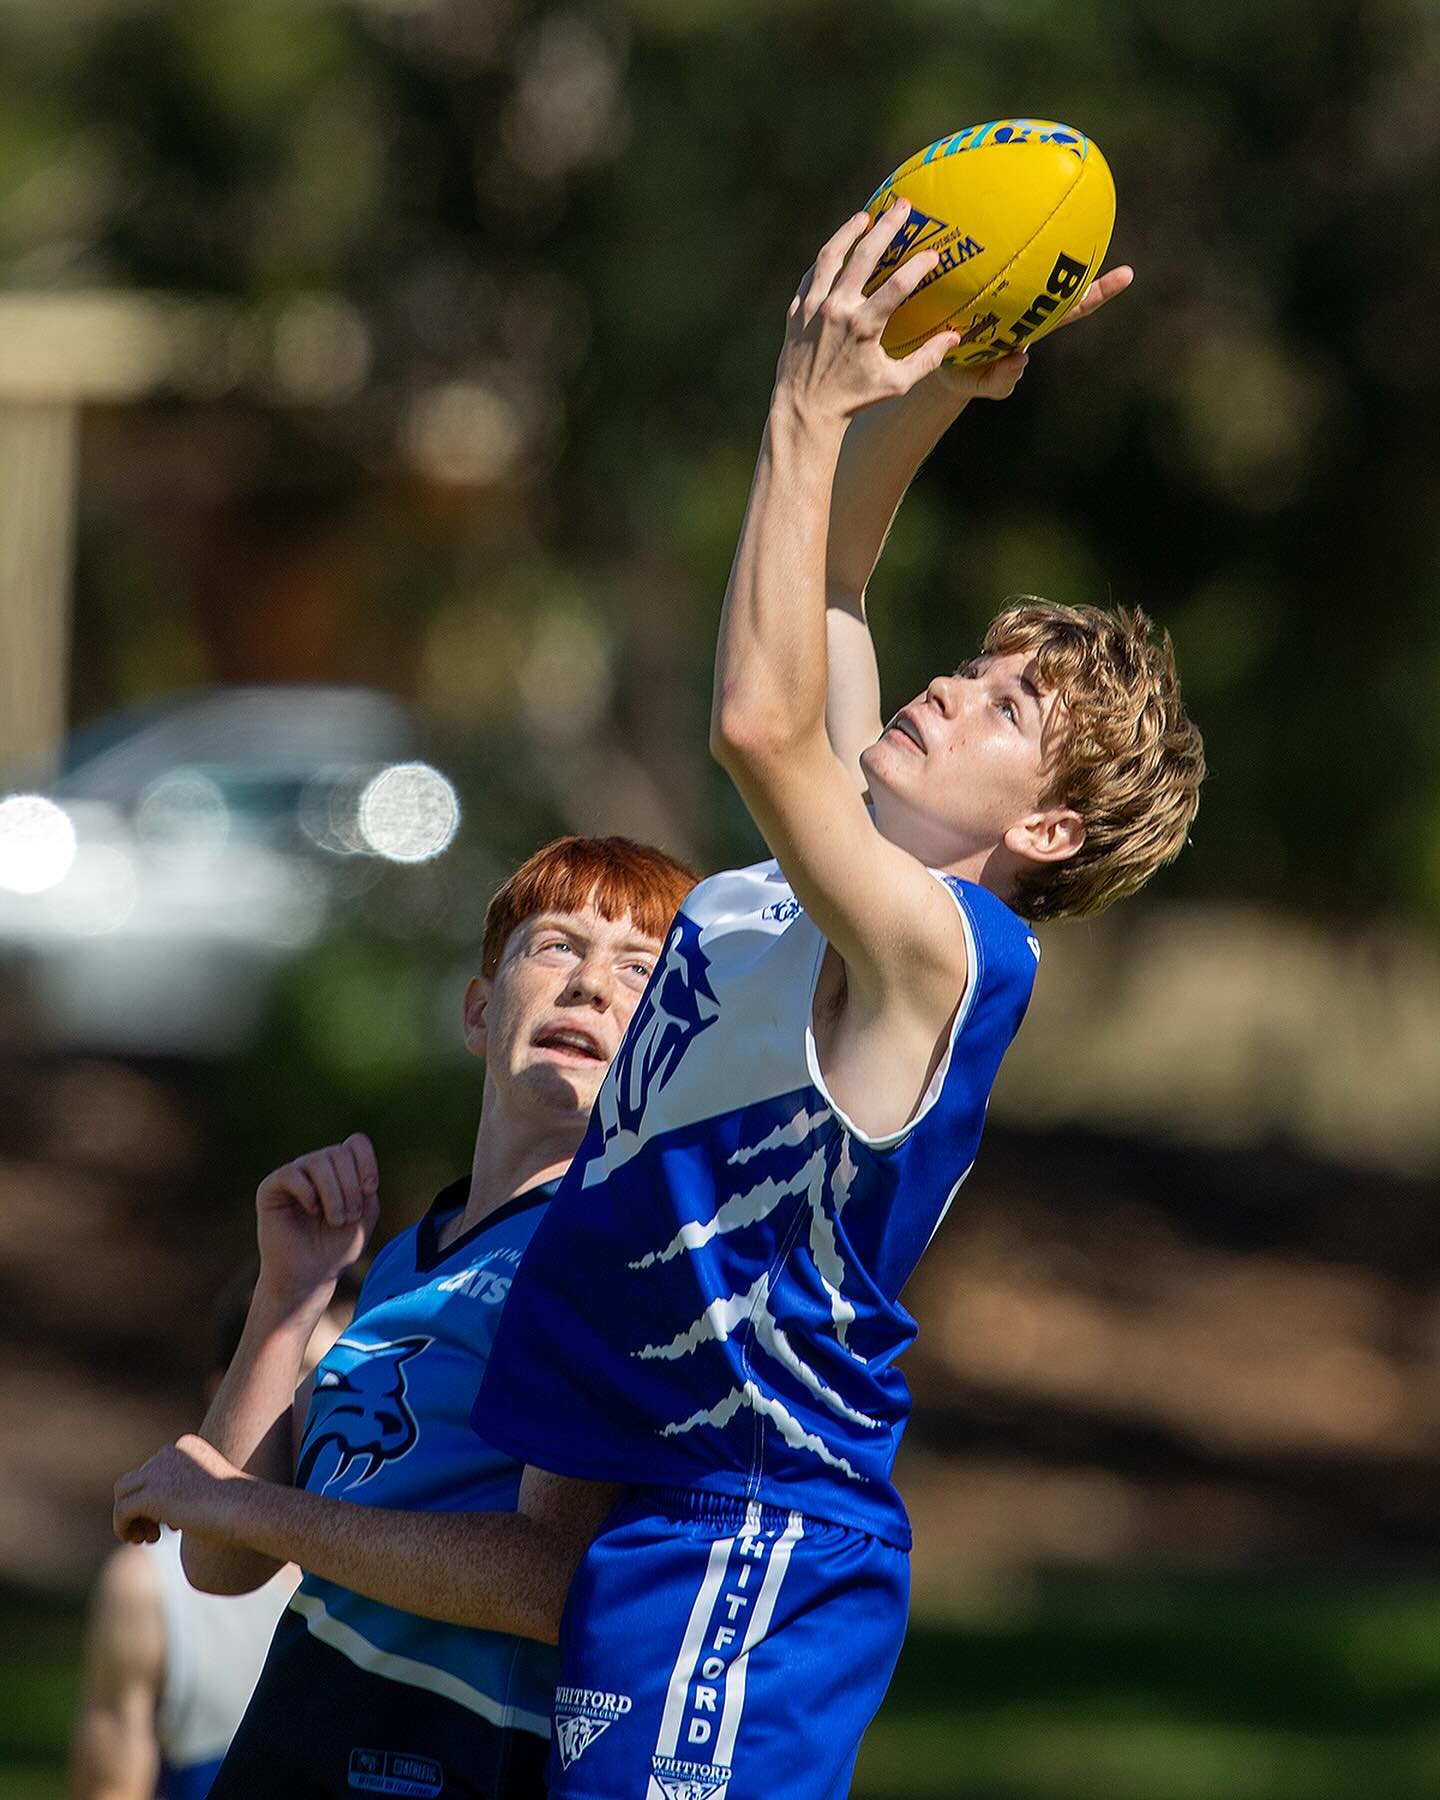 Sunday&rsquo;s weather turned it on and provided great conditions for some ripping grabs down at MacDoanld Reserve&hellip;

Photos: @maxted

#wjfc_wildcats #wafooty #wajuniorfooty